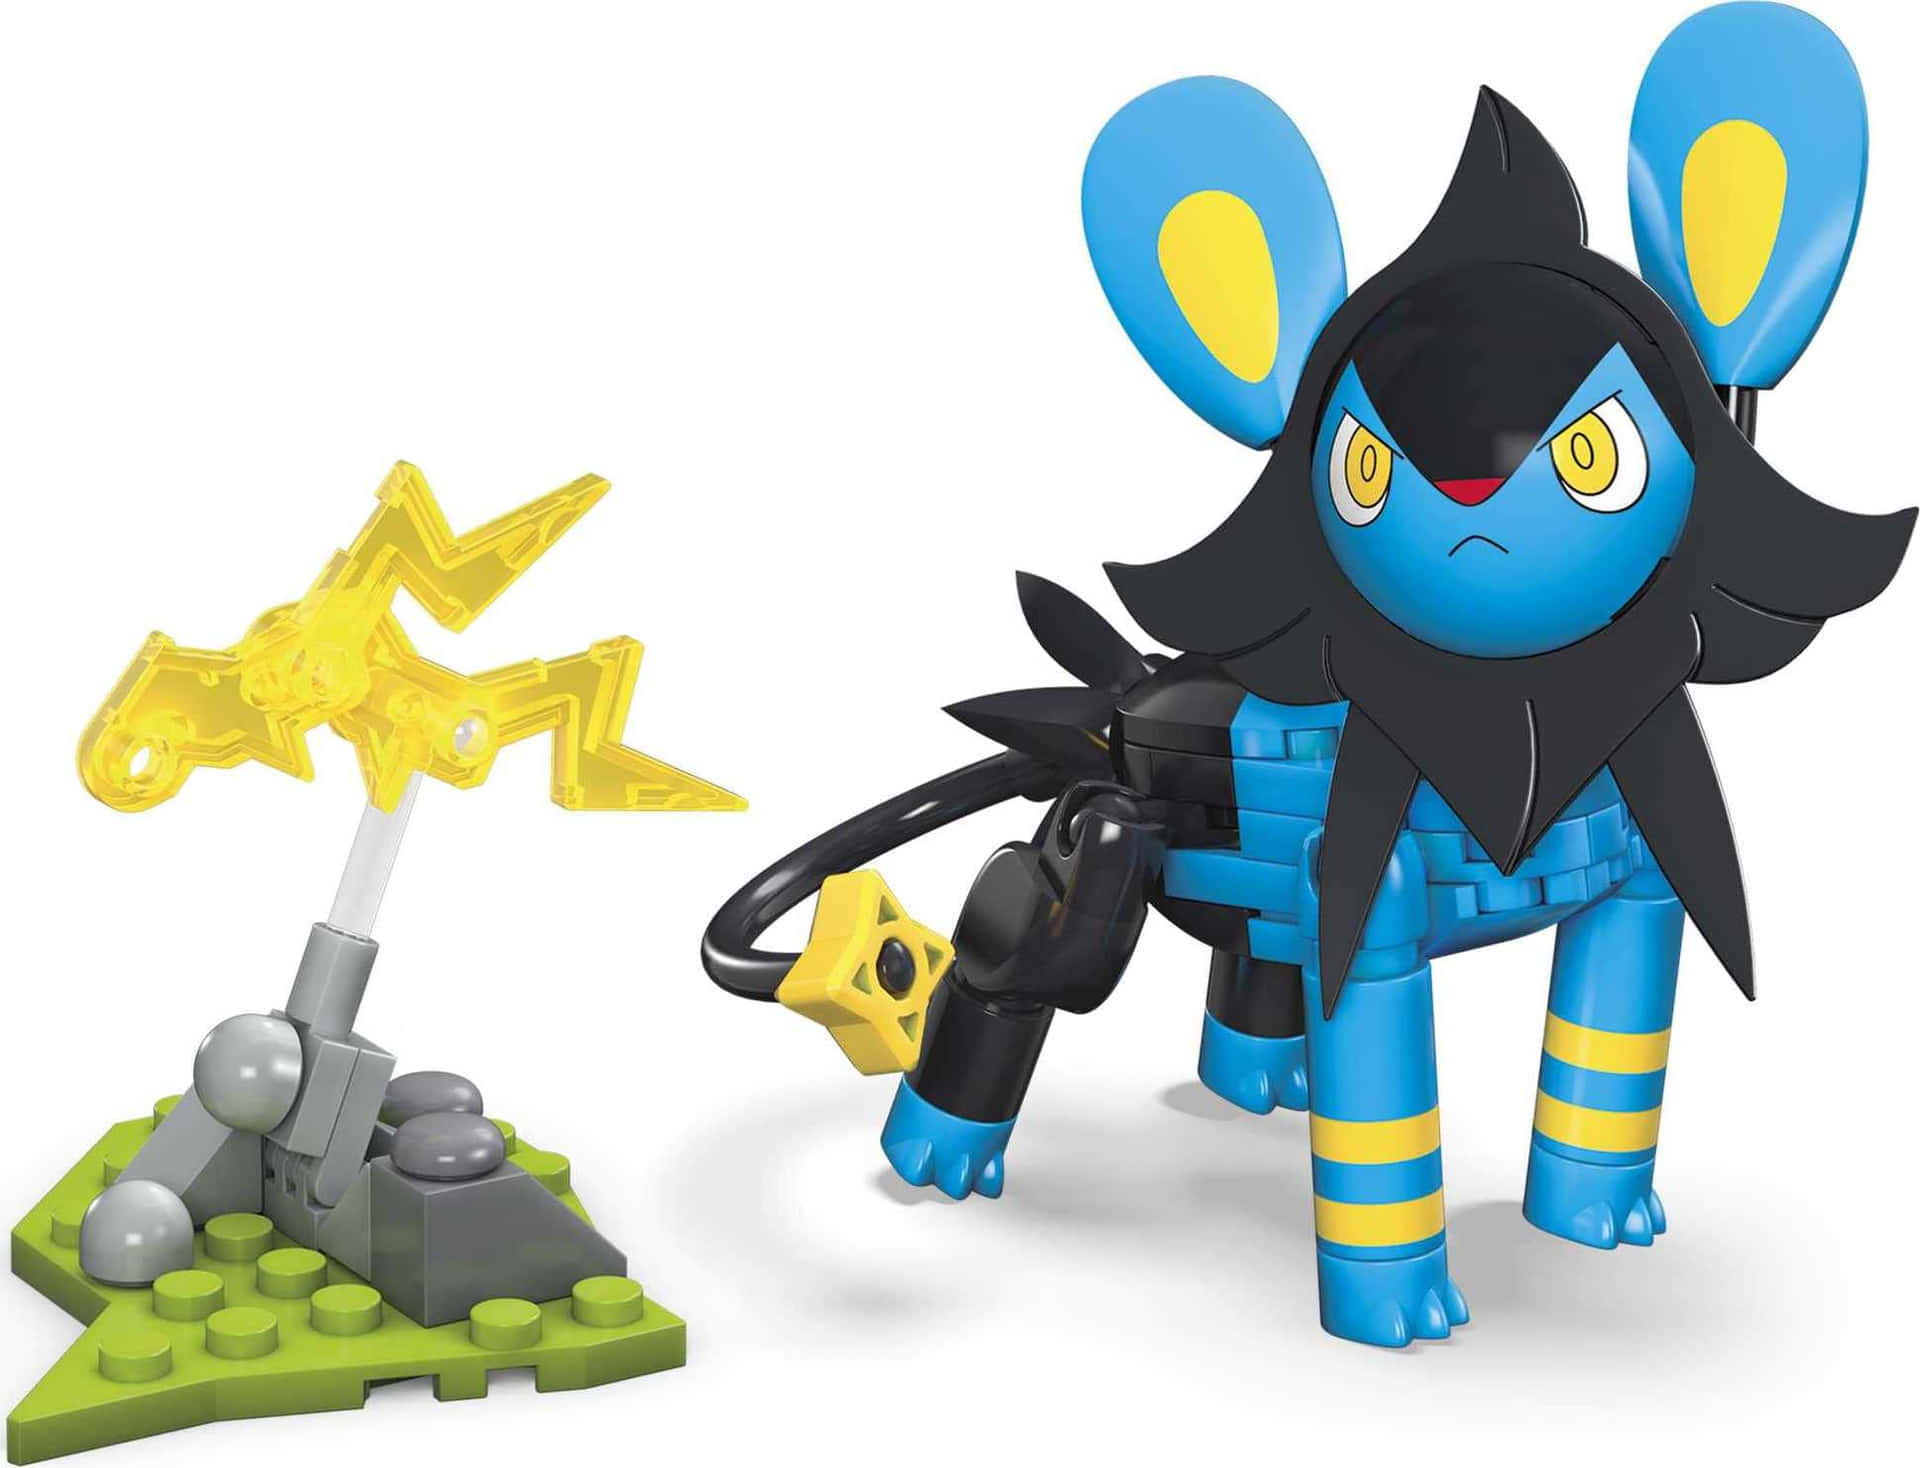 Luxio Mega Construx Model - Assembled and Ready for Action! Wallpaper